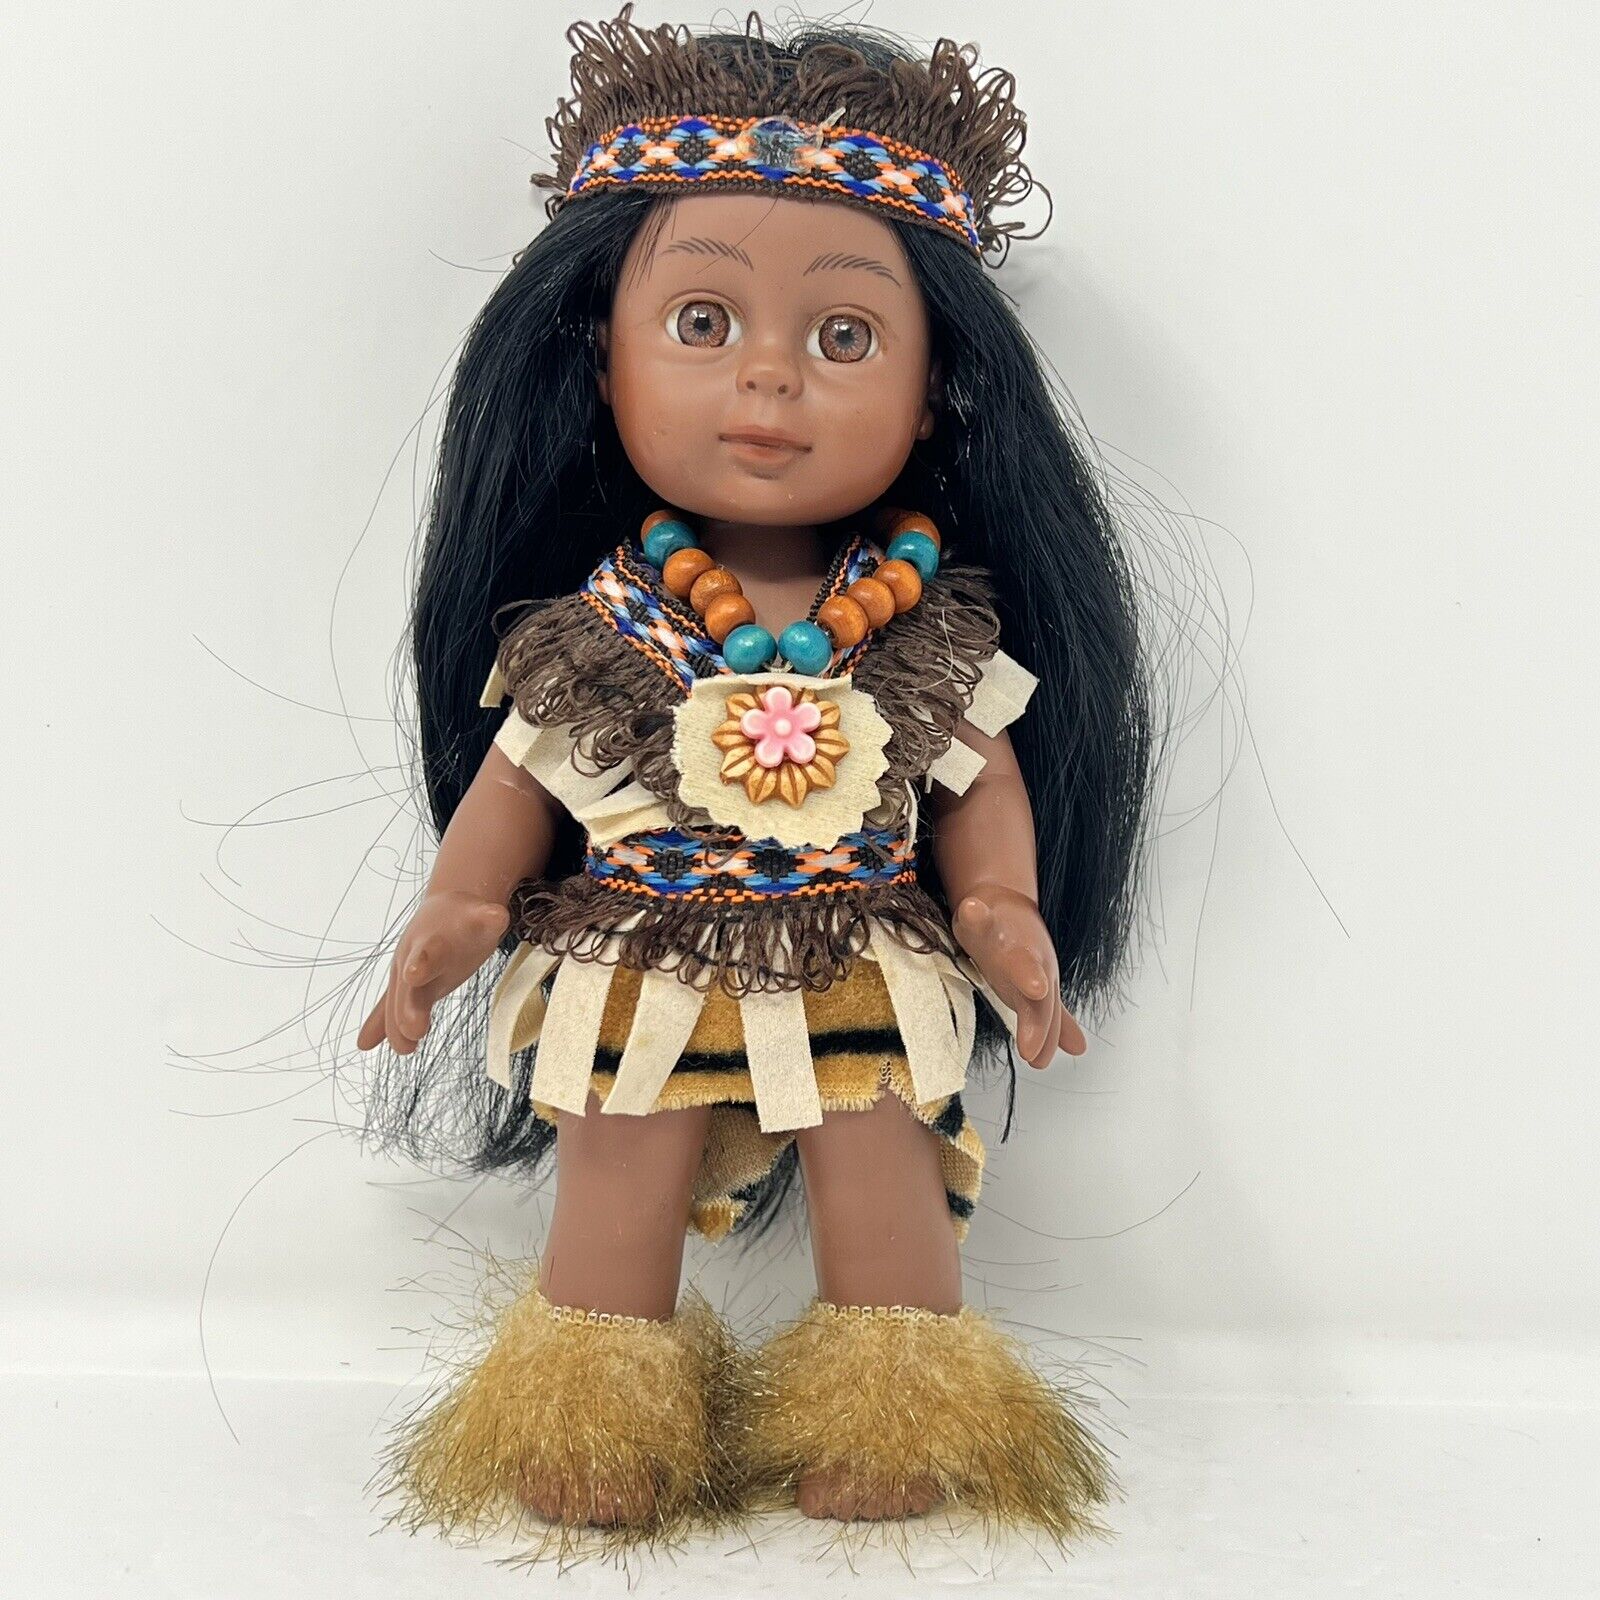 Vintage Native American Doll Rare Collectible  hard plastic in Handmade  Costume